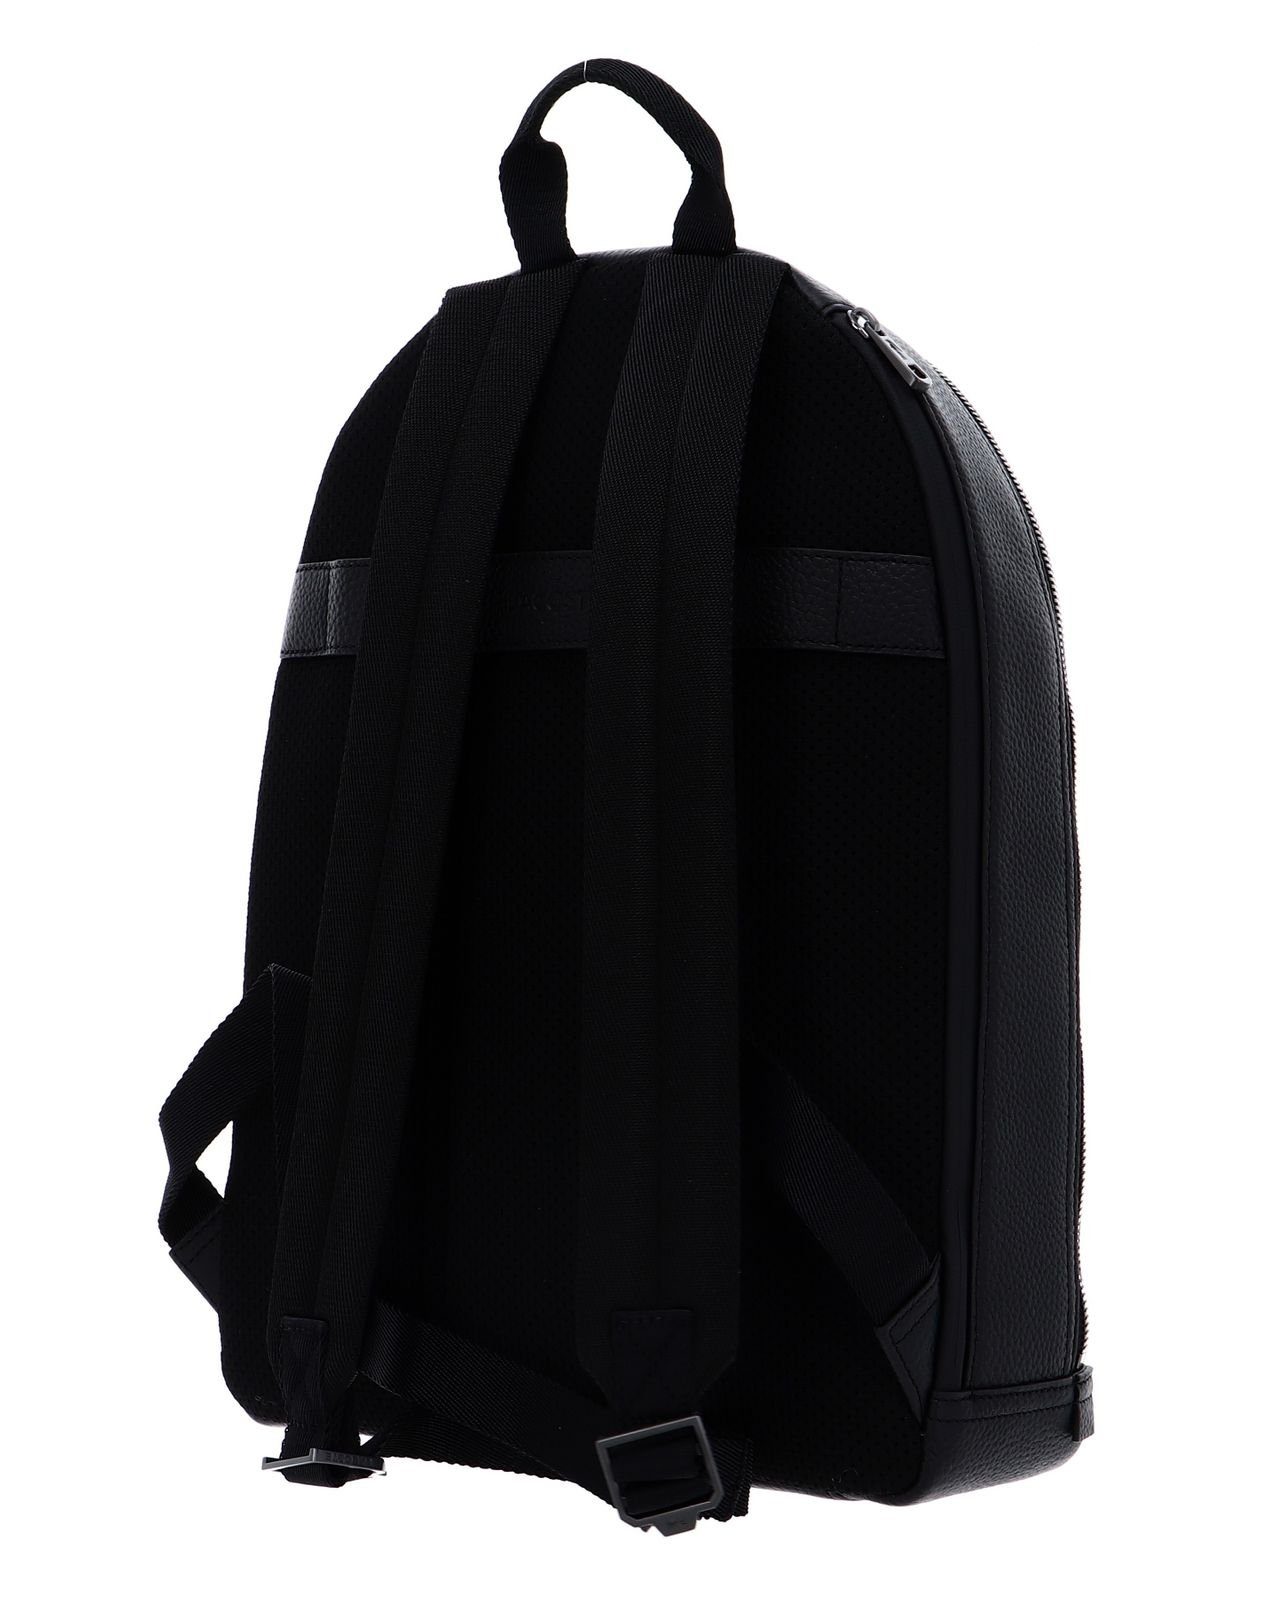 Lacoste Mate Rucksack Soft